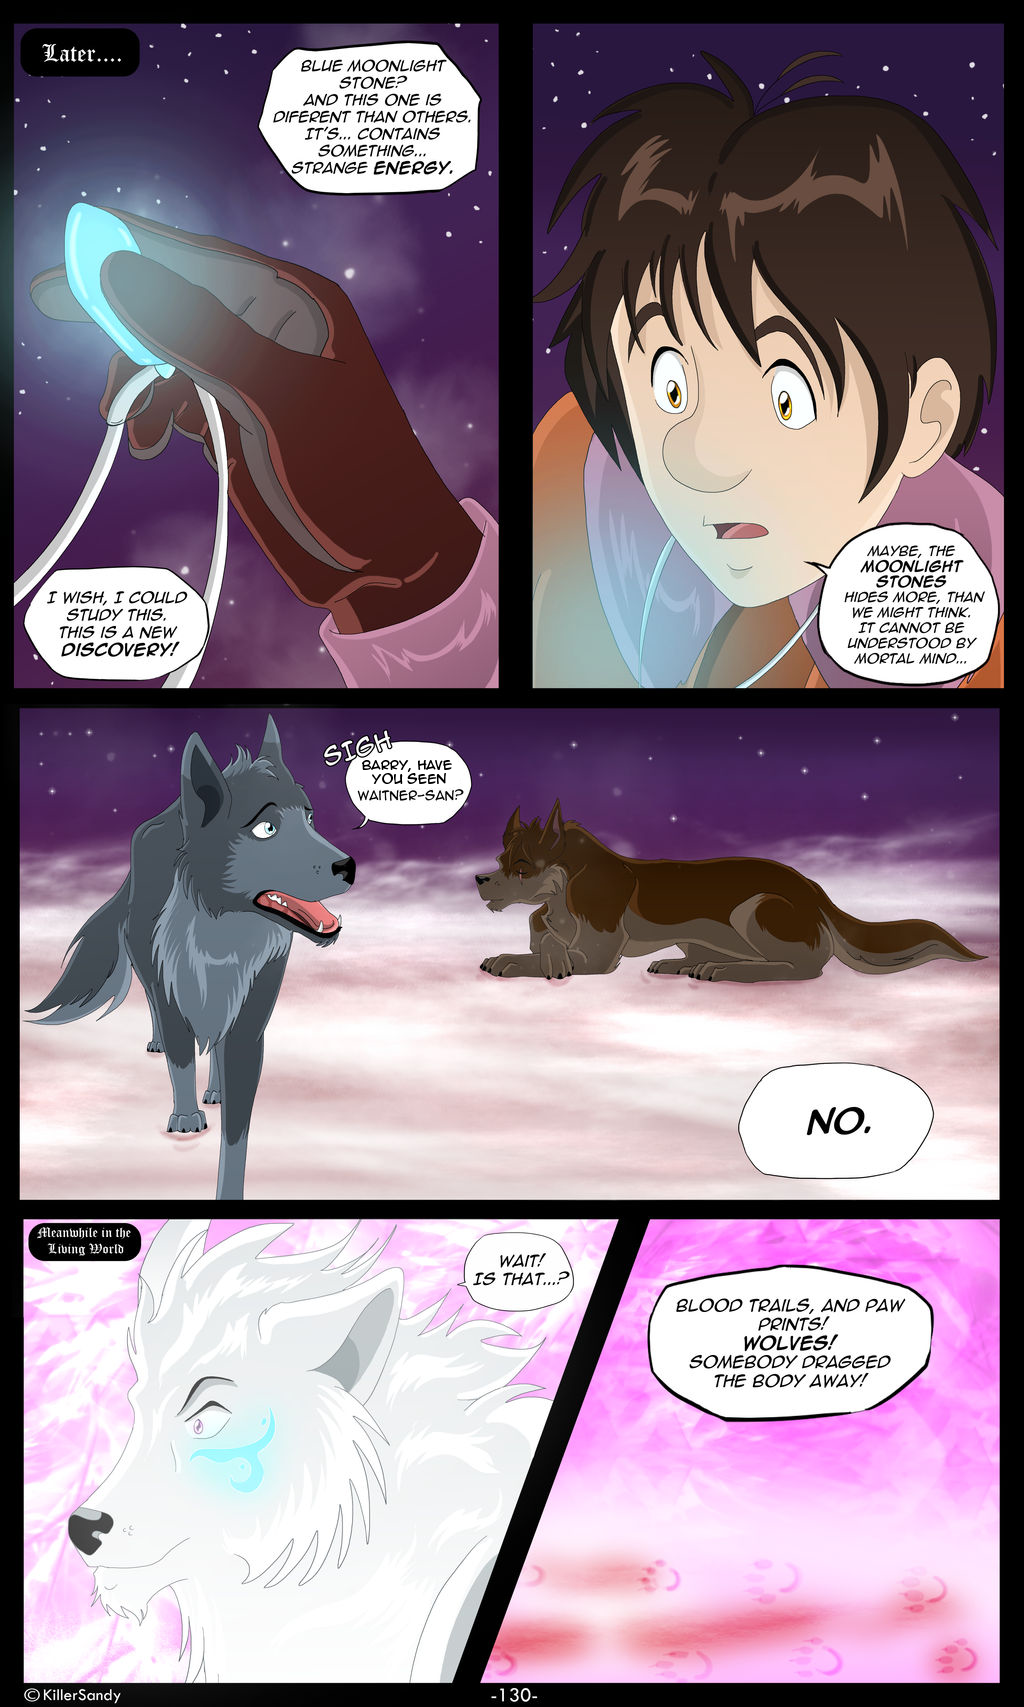 The Prince of the Moonlight Stone page 130